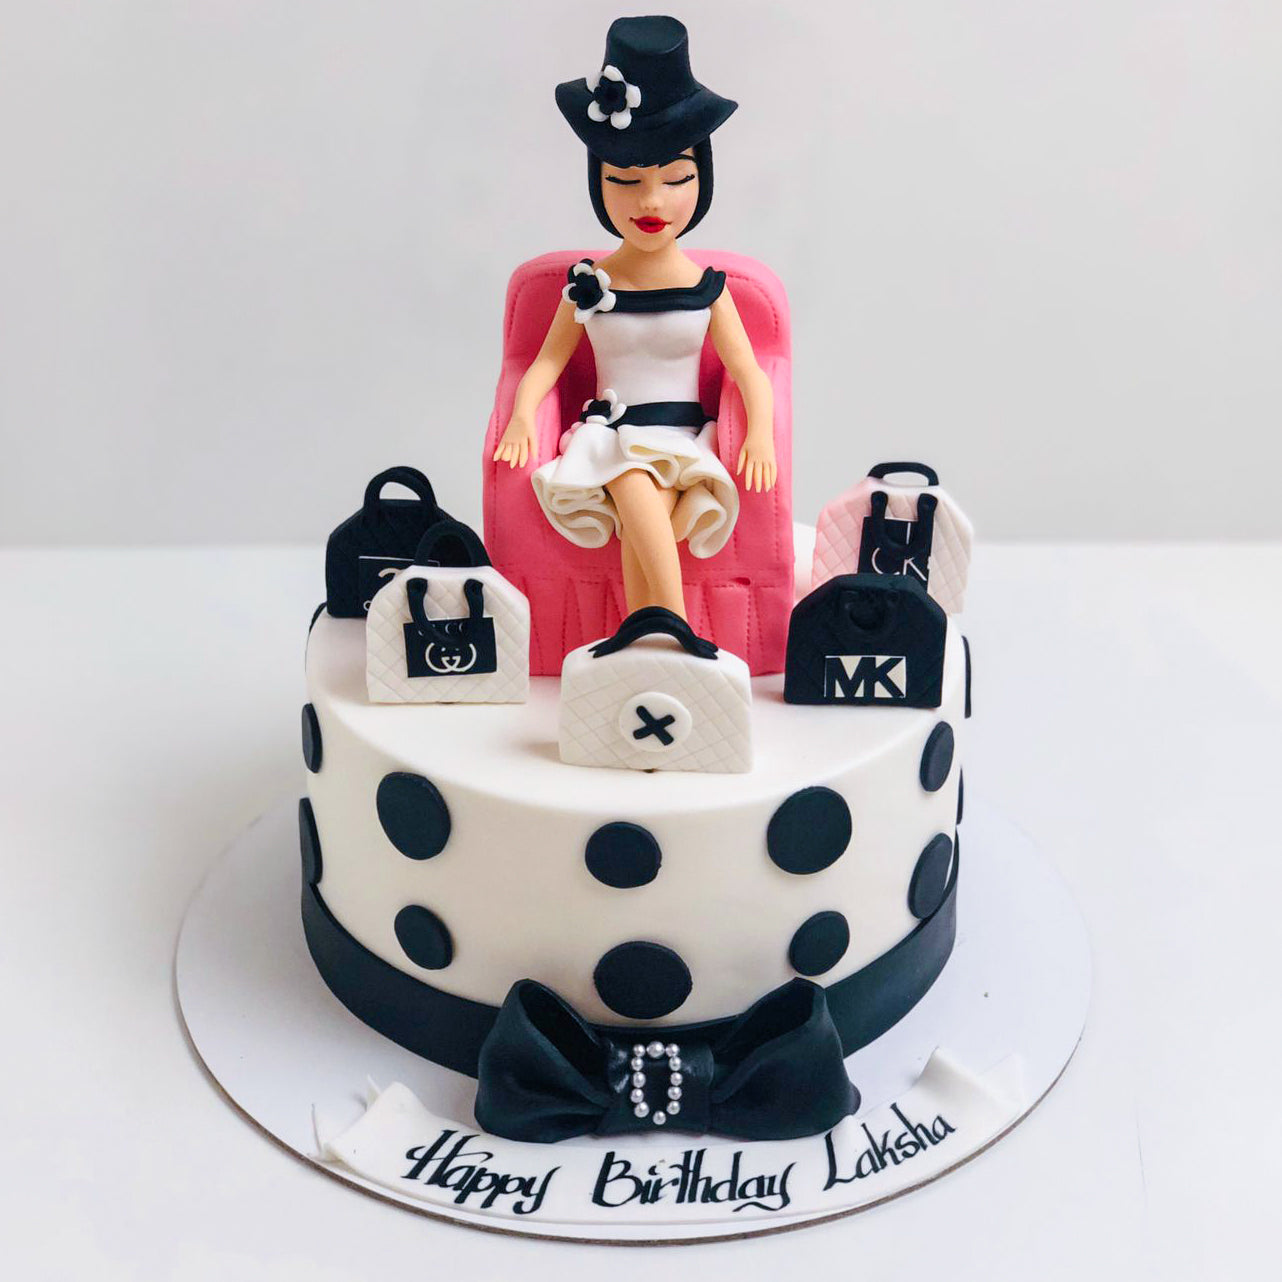 Girls Birthday Cake Ideas. 21+ Themes to Choose from